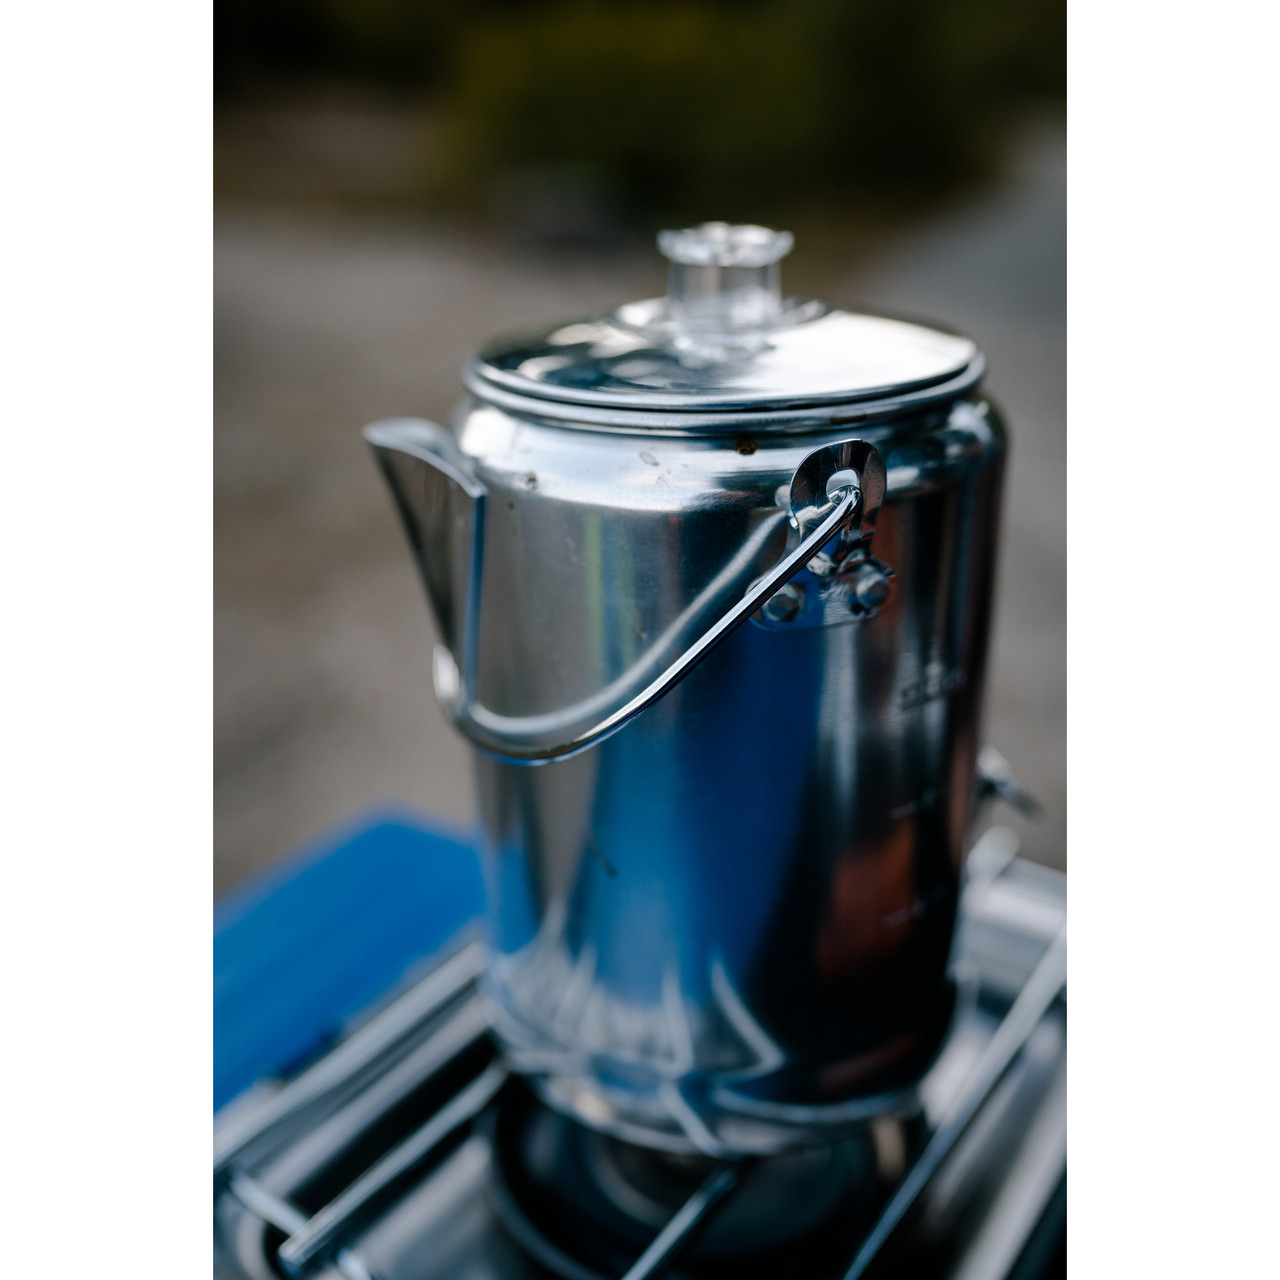 APOXCON RNAB08FSRHMC5 apoxcon coffee percolator, camping coffee pot 9 cups  stainless steel coffee maker with clear top glass knob, percolator coffe